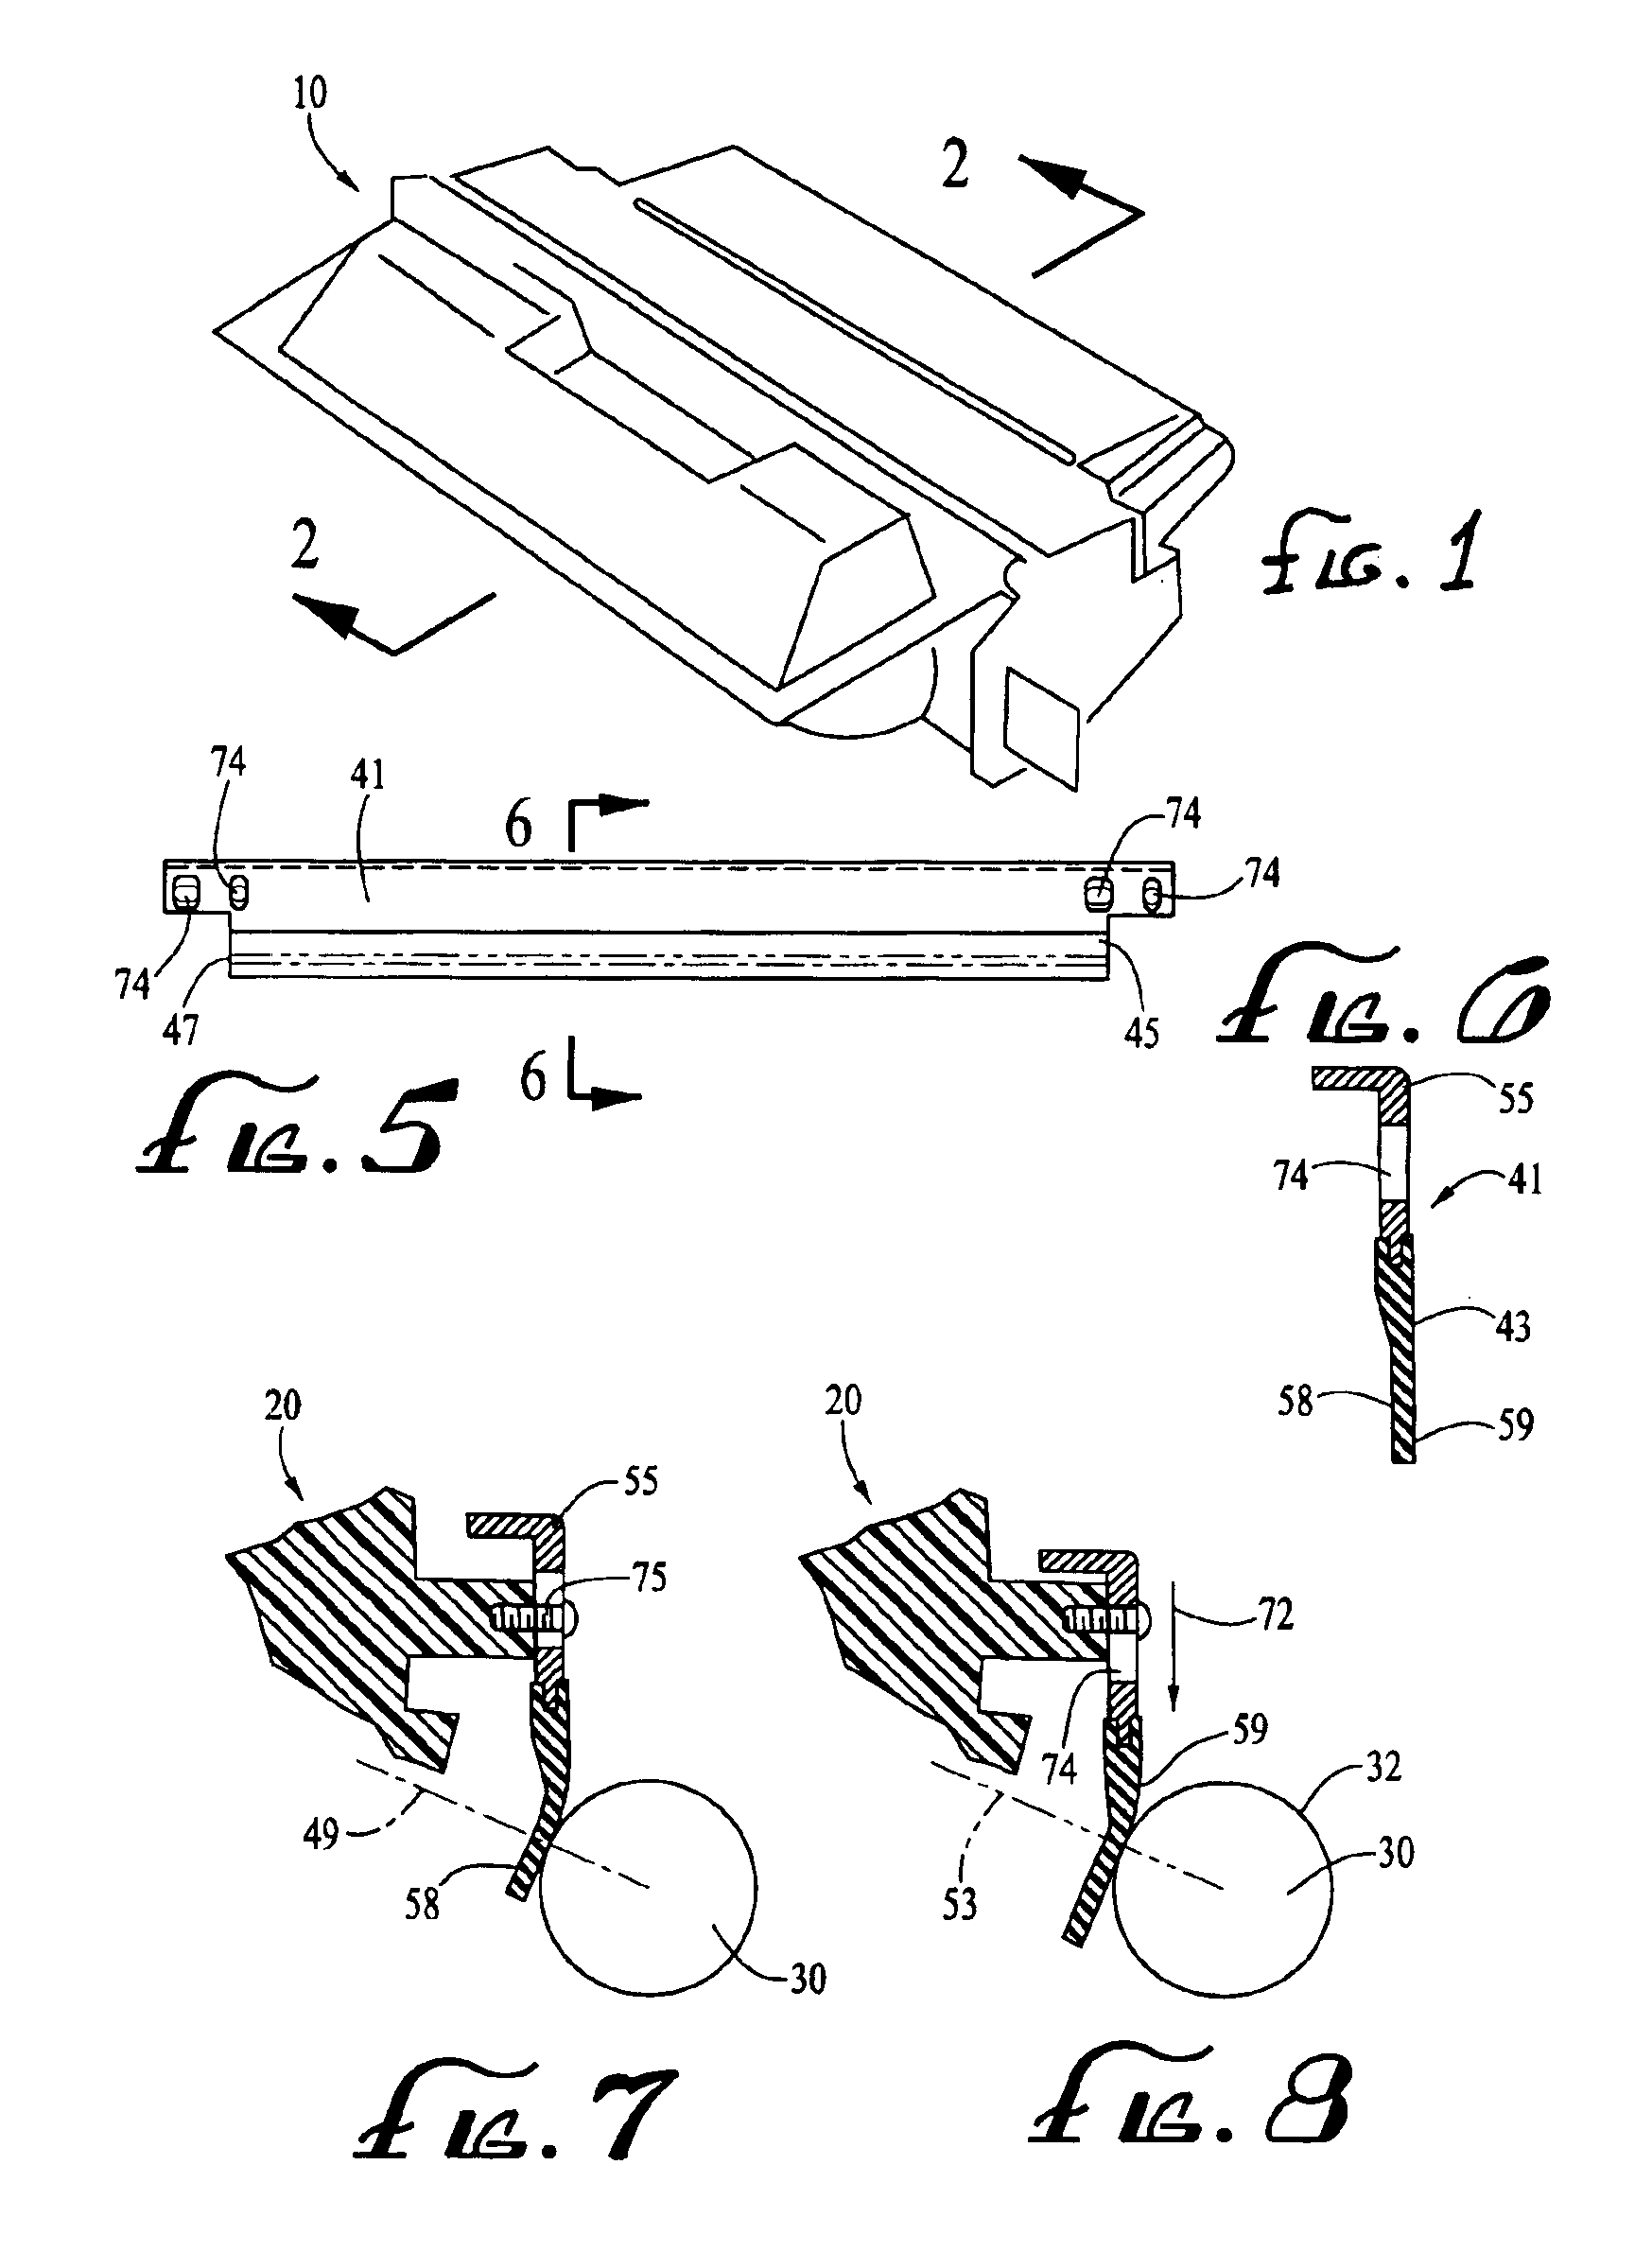 Remanufactured toner cartridge having modified roller section